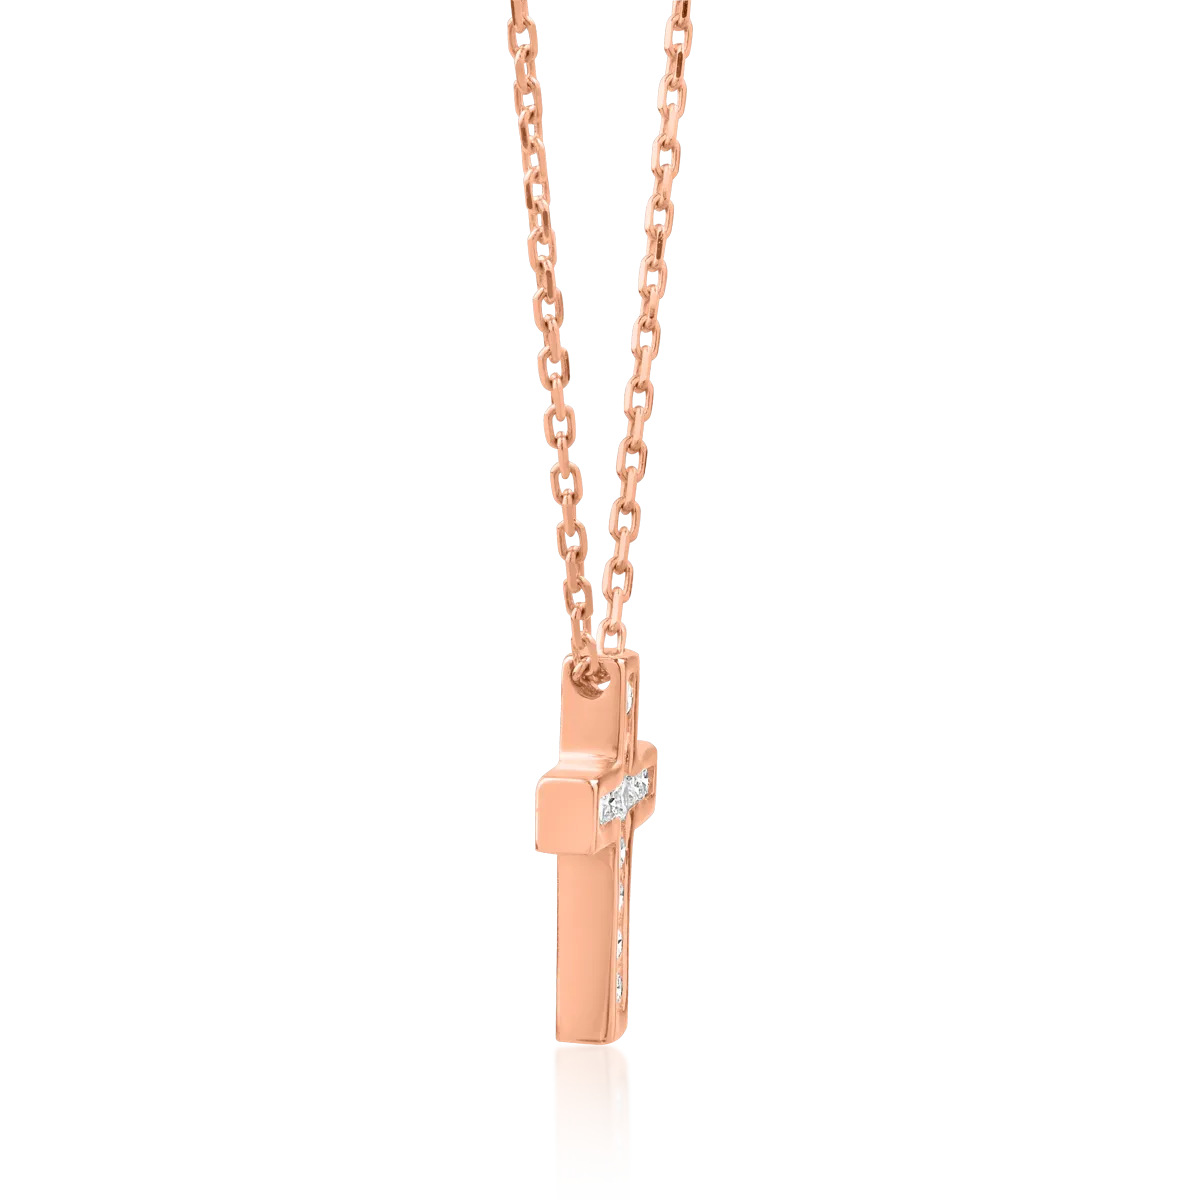 18K rose gold pendant necklace with 0.07ct diamonds